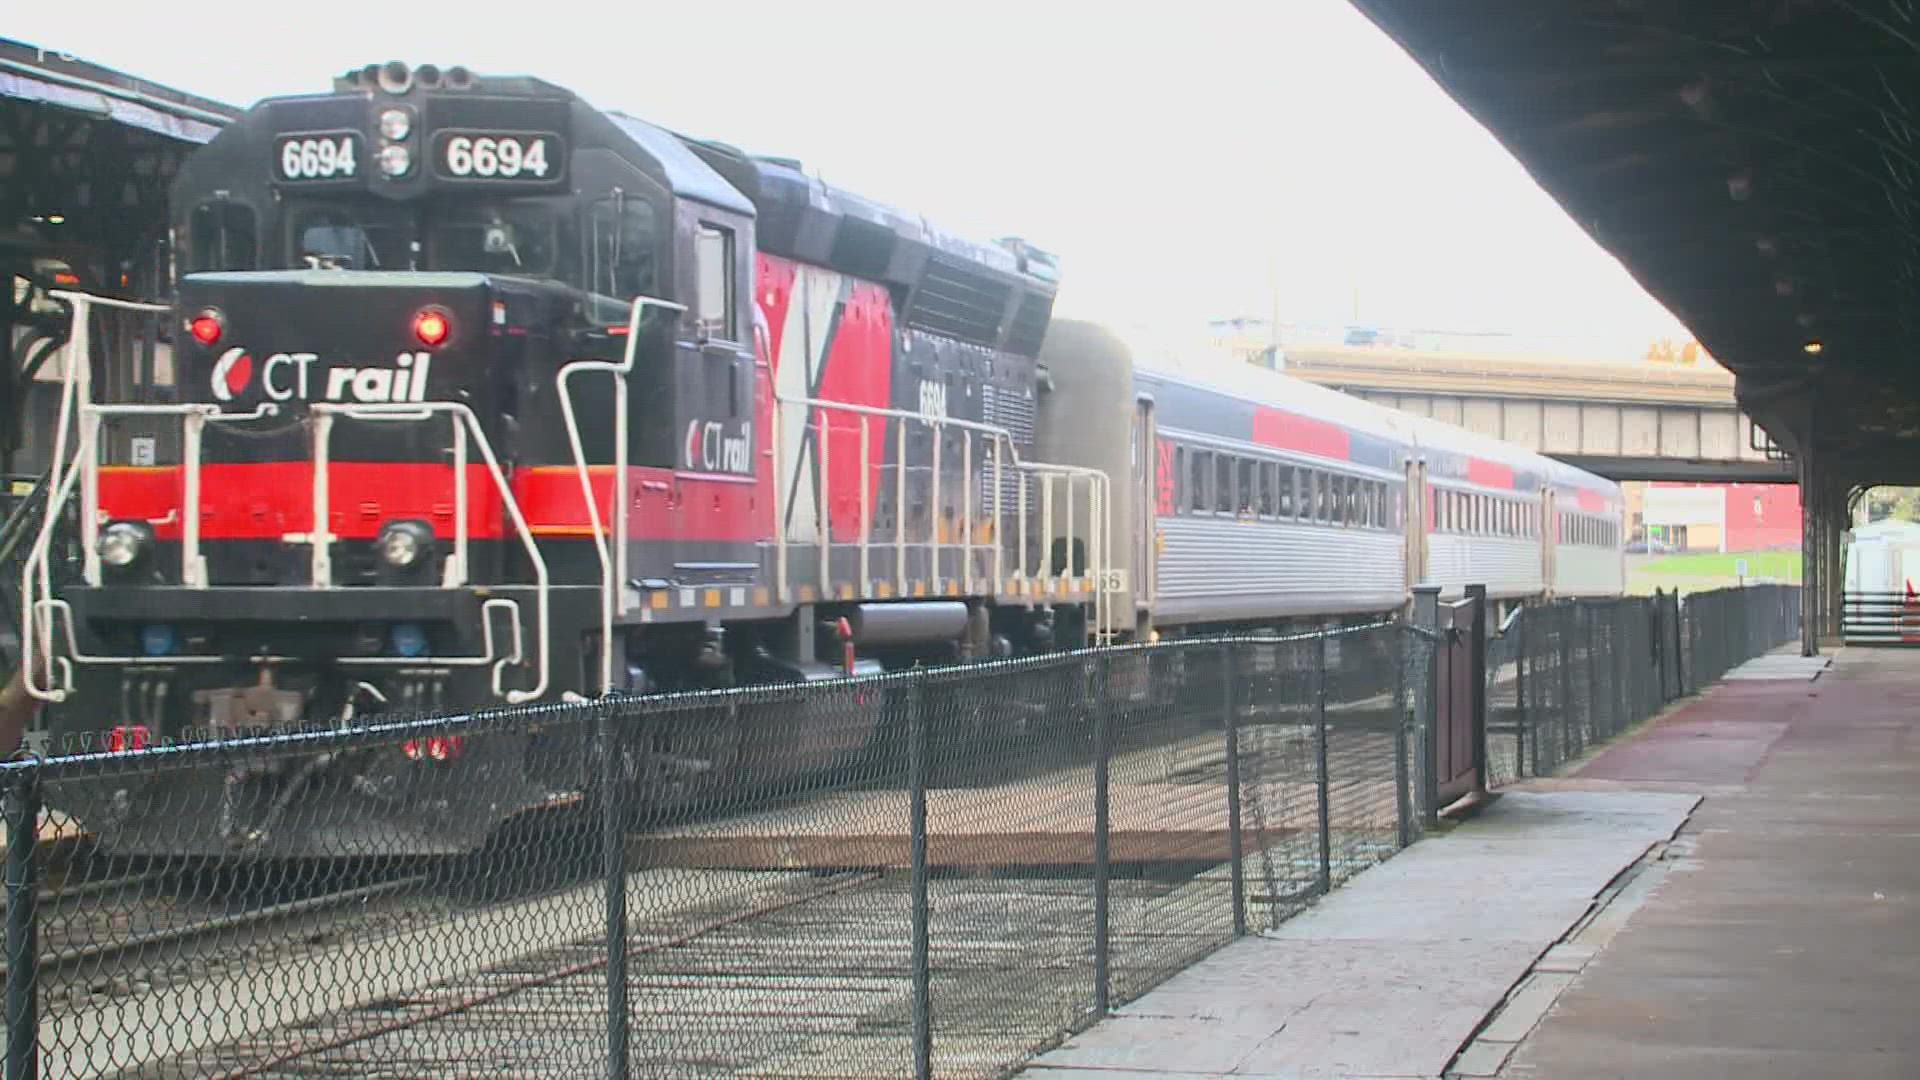 The new trains begin Nov. 1 and will provide additional weekday morning options for travelers.